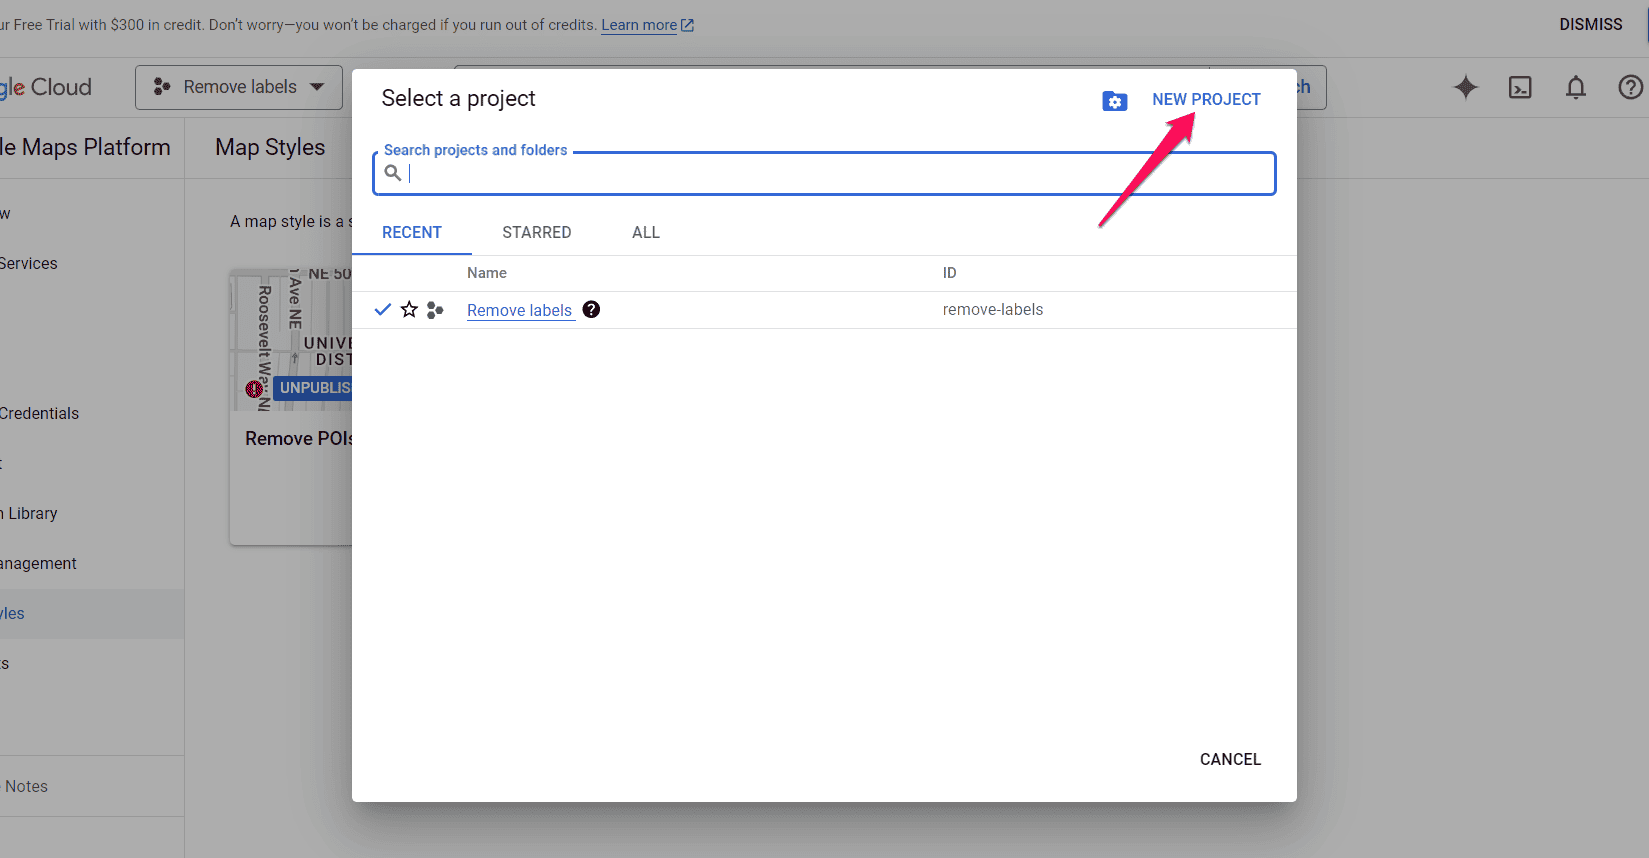 Creating a new project in Google Cloud Console